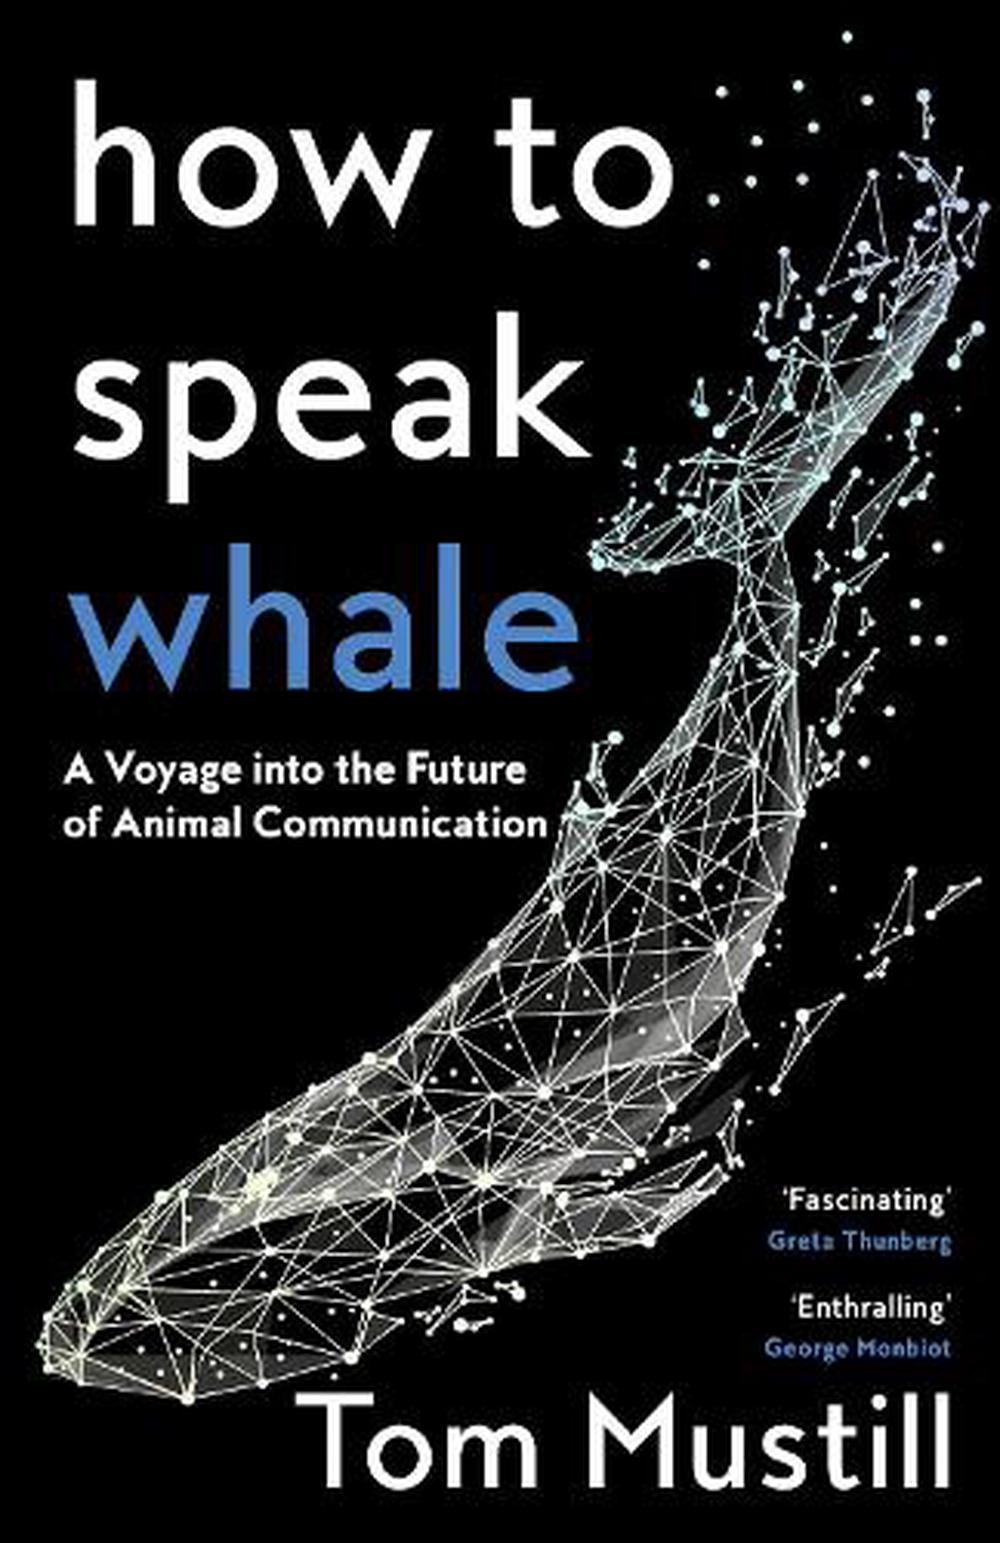 How to Speak Whale by Tom Mustill, Paperback, 9780008363390 | Buy online at  The Nile